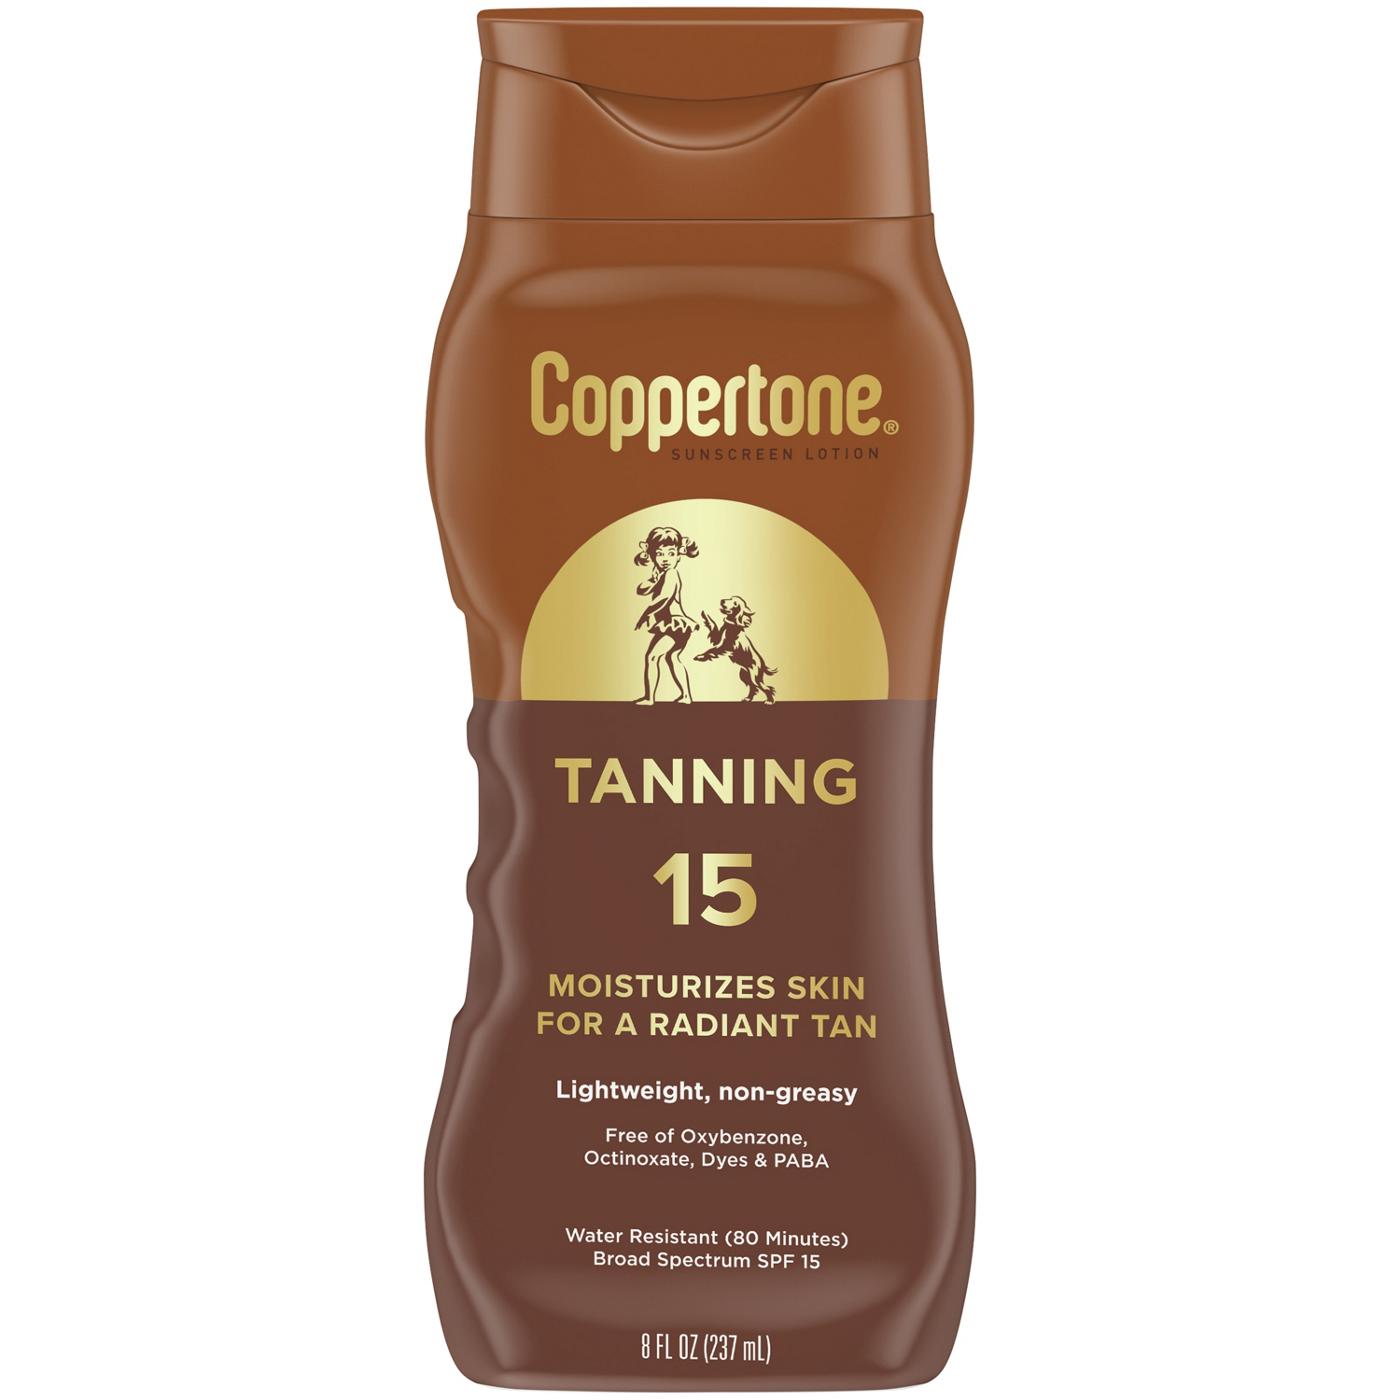 Coppertone Tanning Sunscreen Lotion SPF 15; image 1 of 2